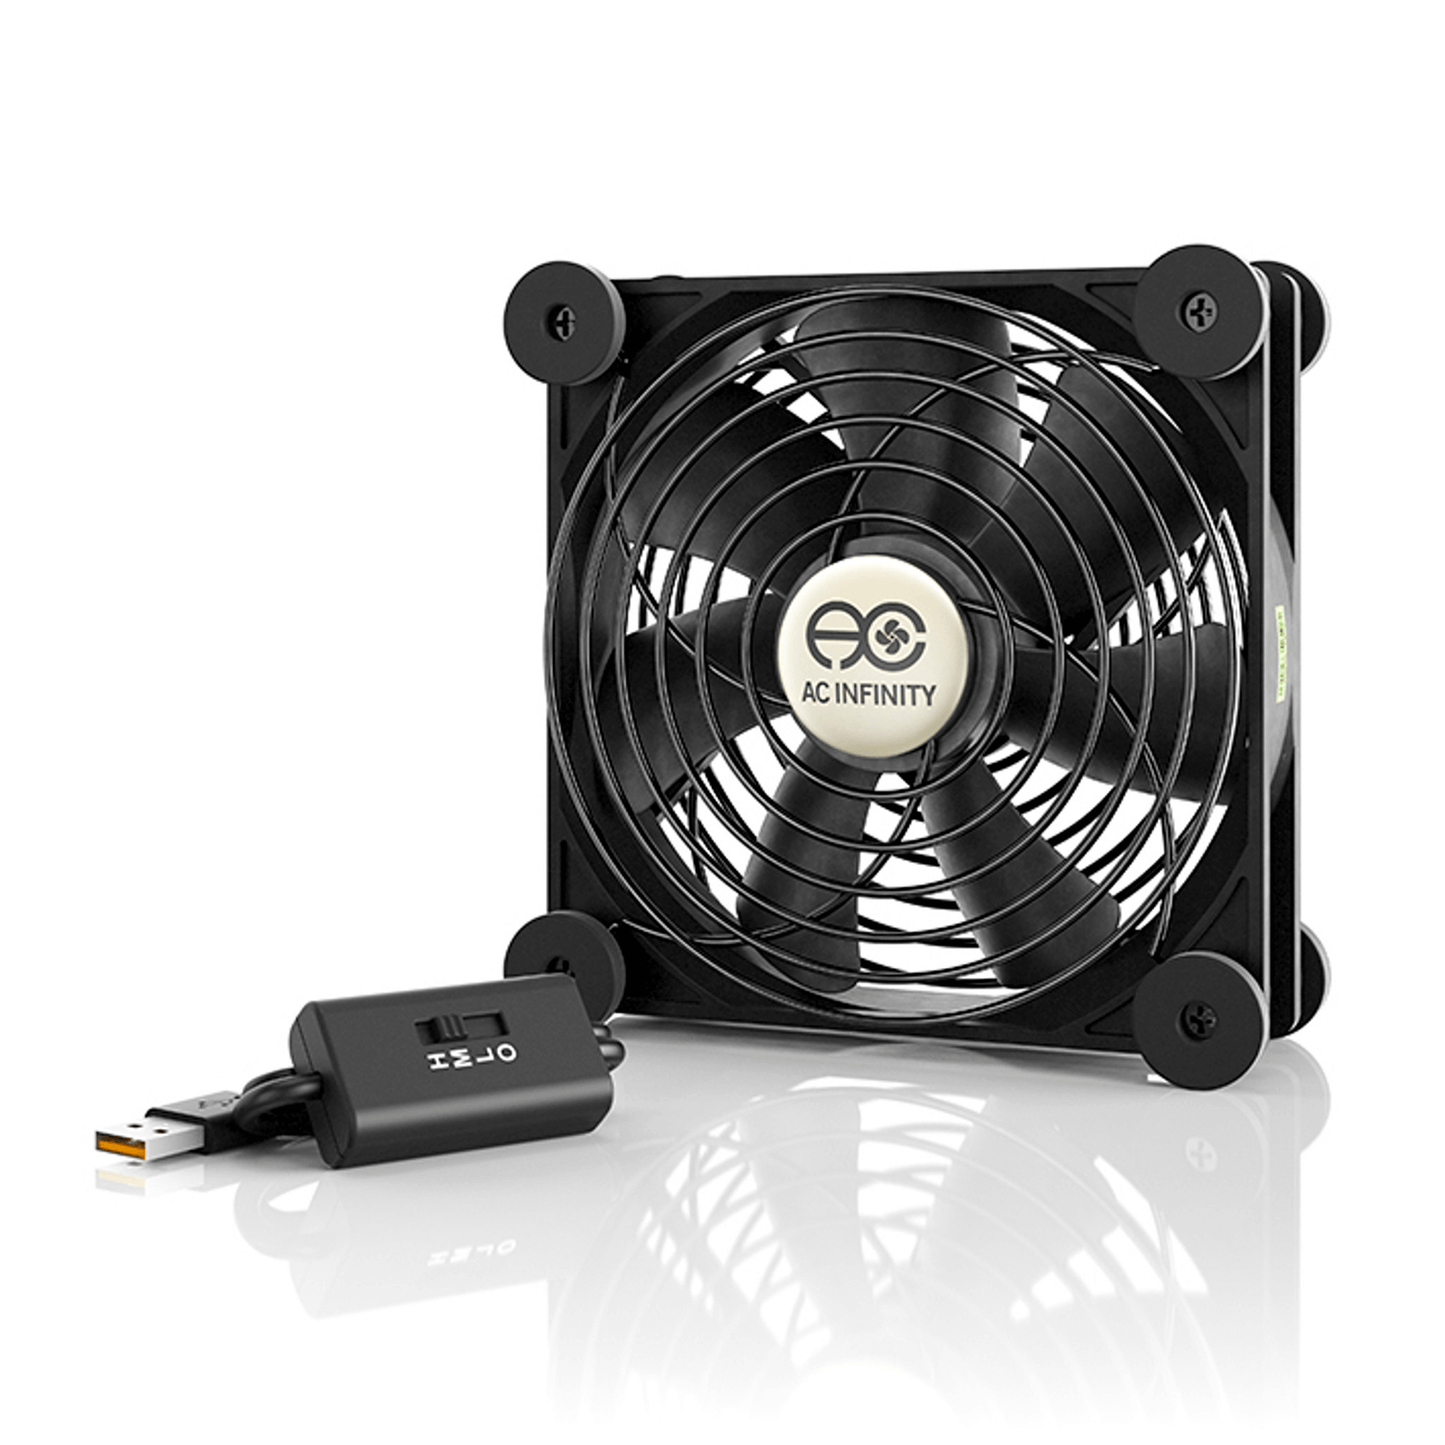 AC Infinity MULTIFAN S3, Quiet USB Cooling Fan, 120mm AI-MPF120A Climate Control 854759004310